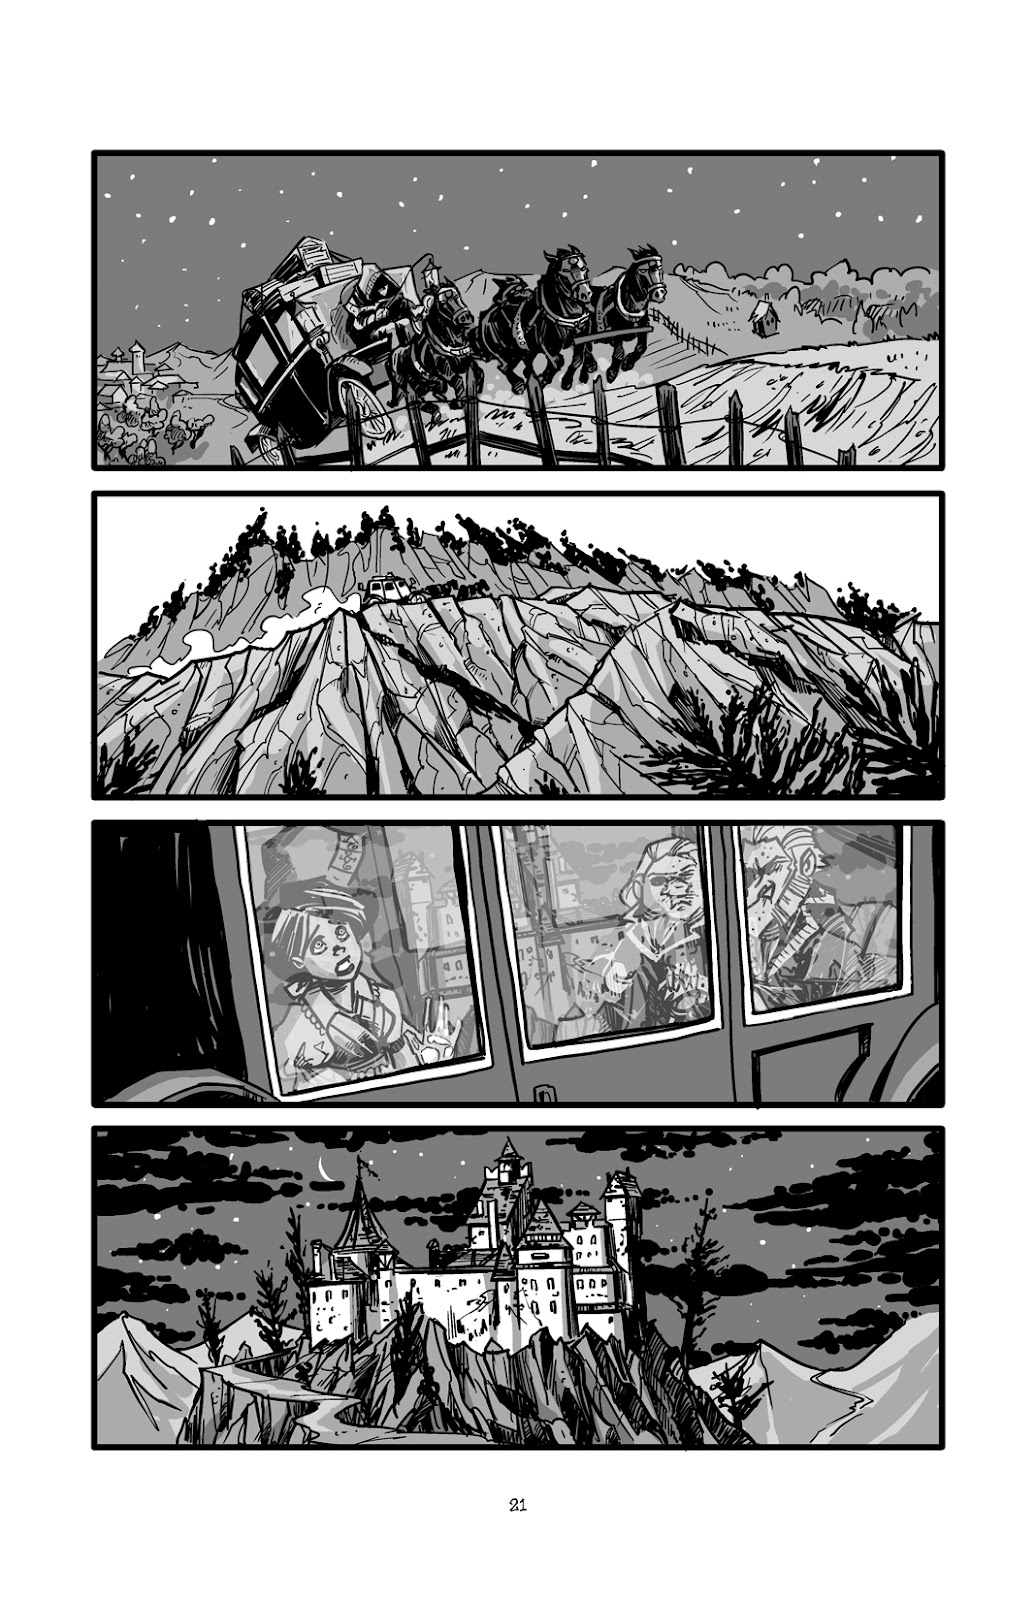 Pinocchio: Vampire Slayer - Of Wood and Blood issue 1 - Page 22